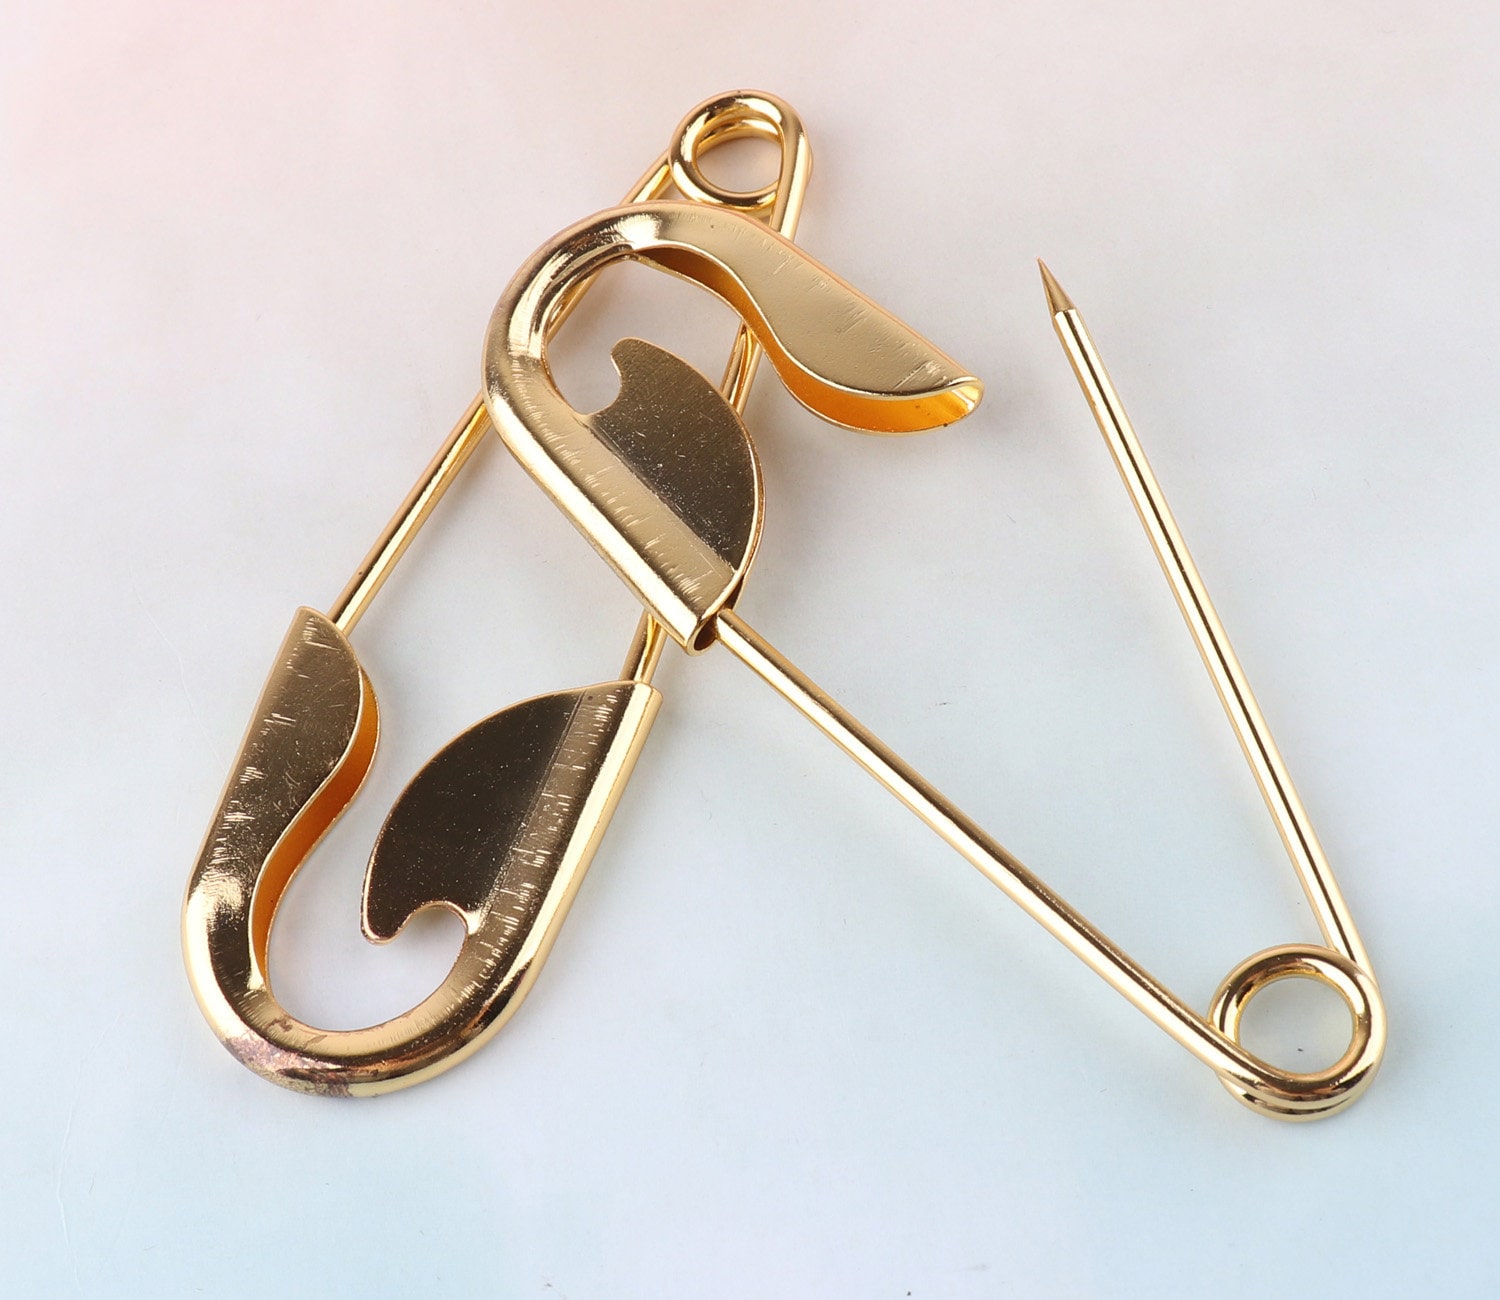 Premium Quality Safety Pins Coil Safety Pins Safety Pins for 